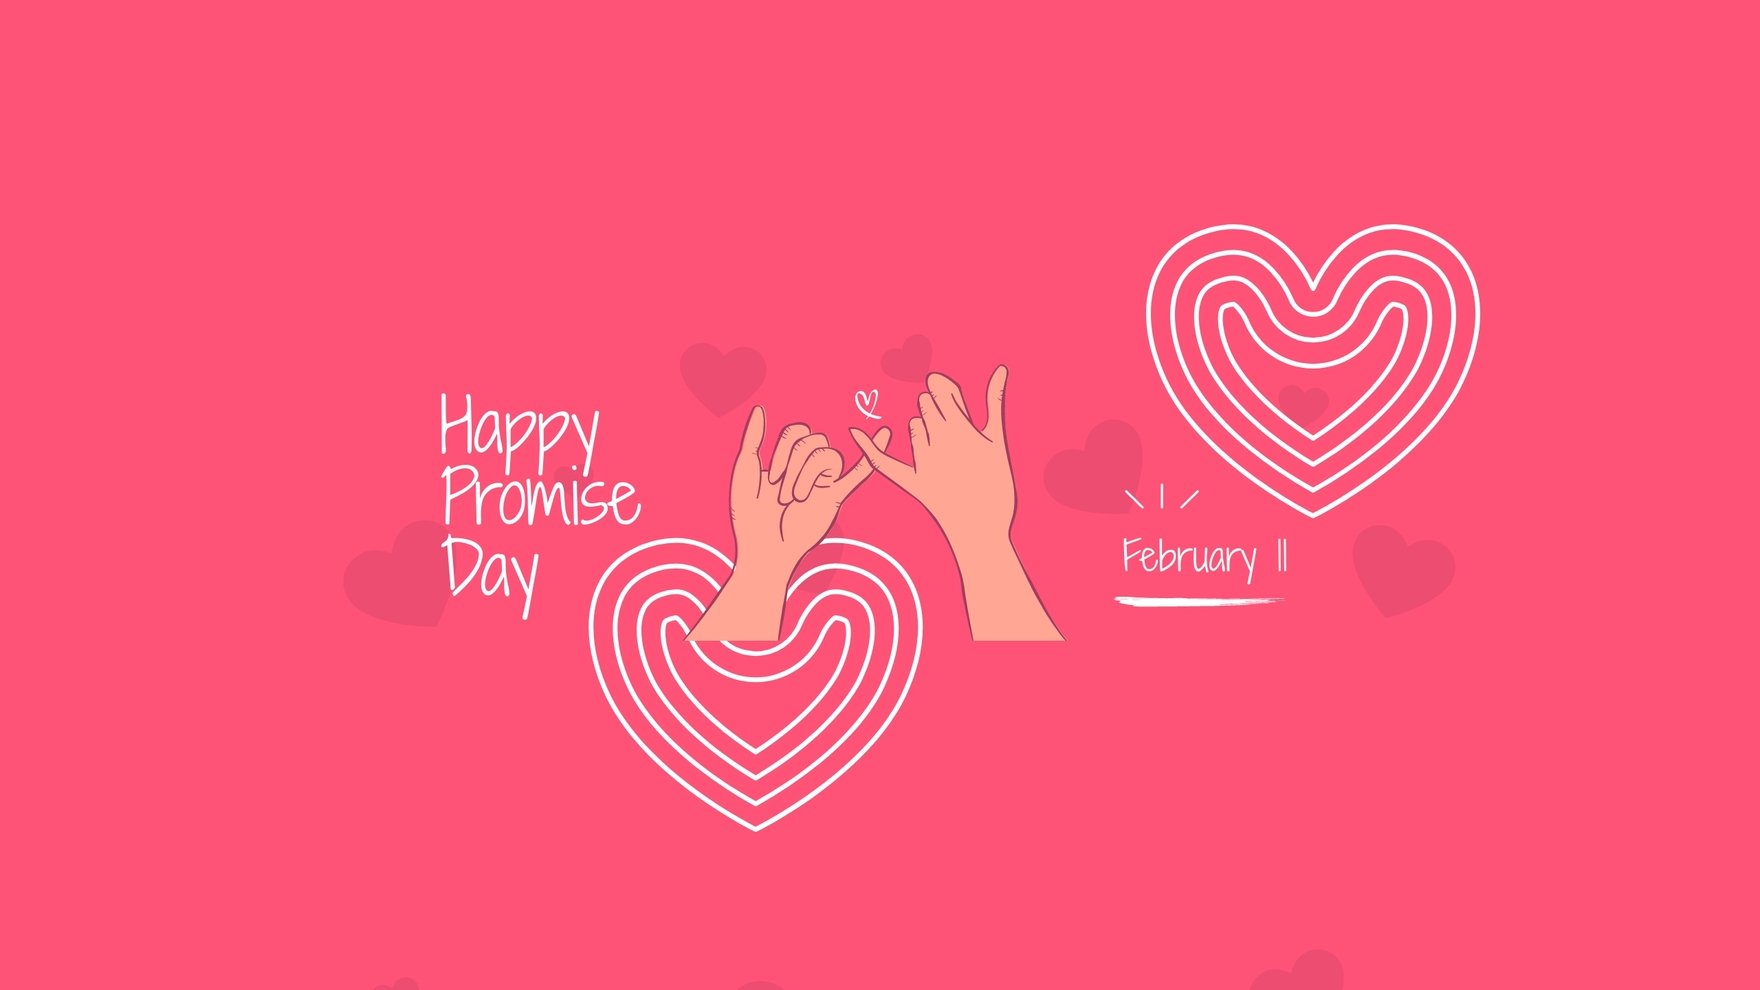 Promise Day Templates - Images, Background, Free, Download 